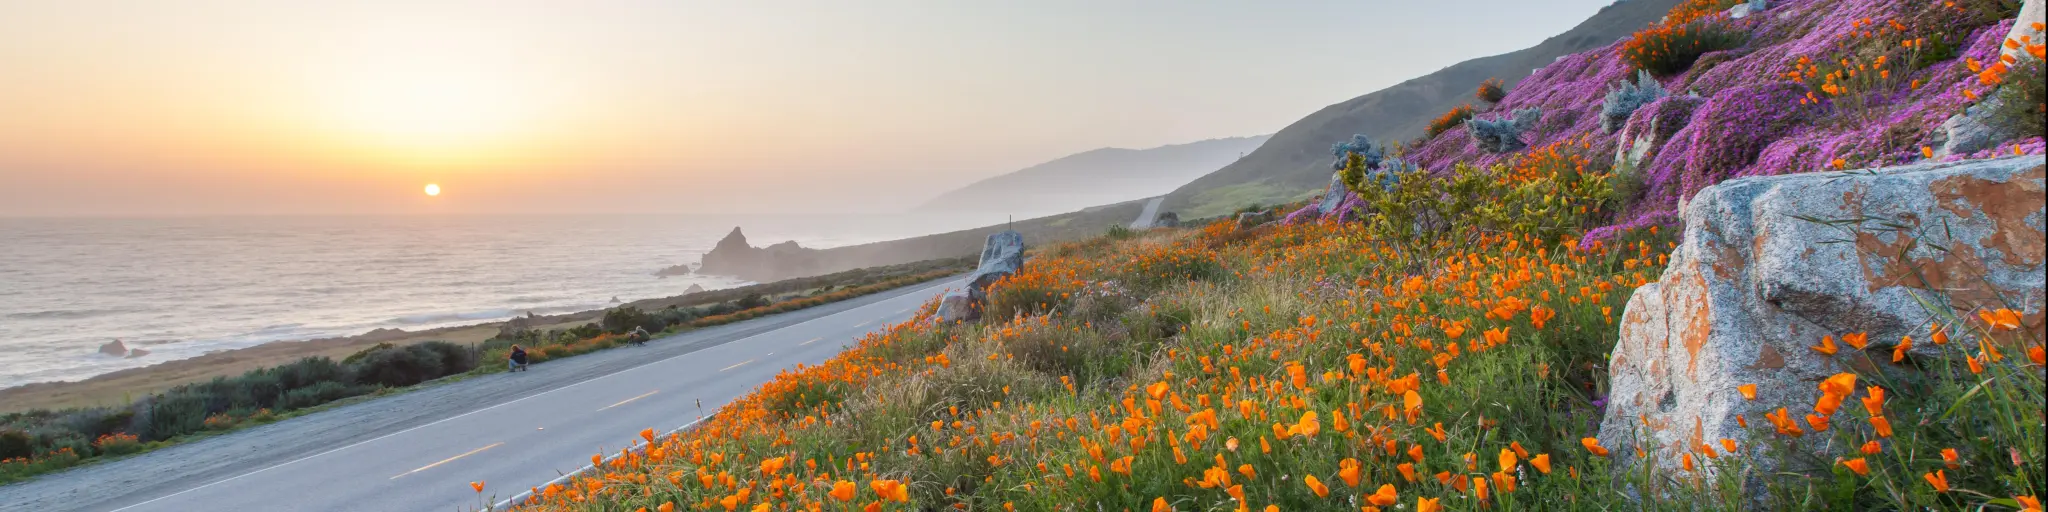 Orange and pink wild flowers next to the road at Big Sur, with the ocean at the foot of cliffs and misty distance